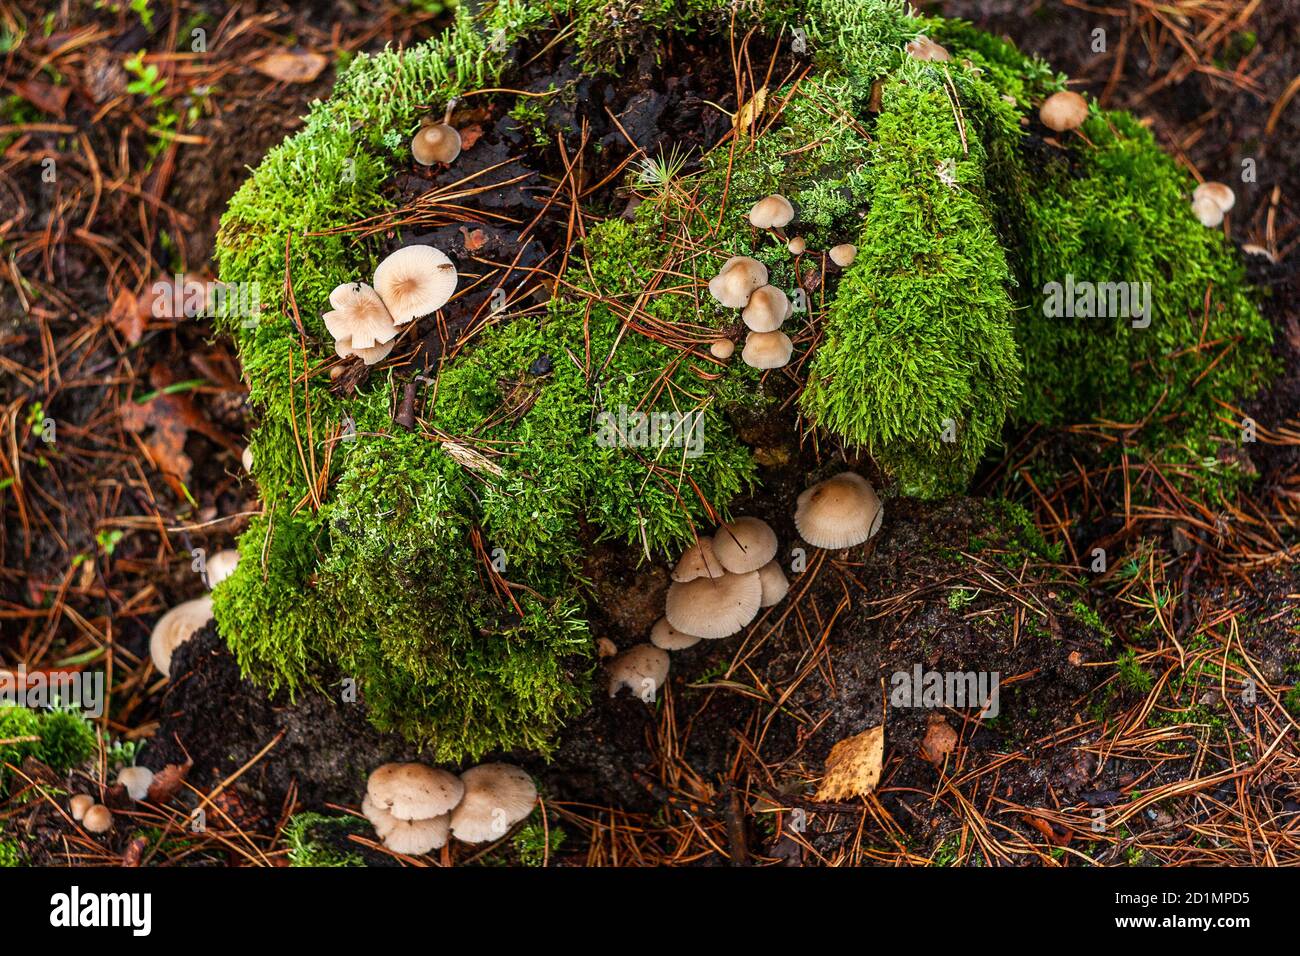 An old trunk overgrown with green moss and mushrooms. Forest cover. Fallen pine needles. Coniferous forest. Autumn in Poland. Walking among the trees. Stock Photo